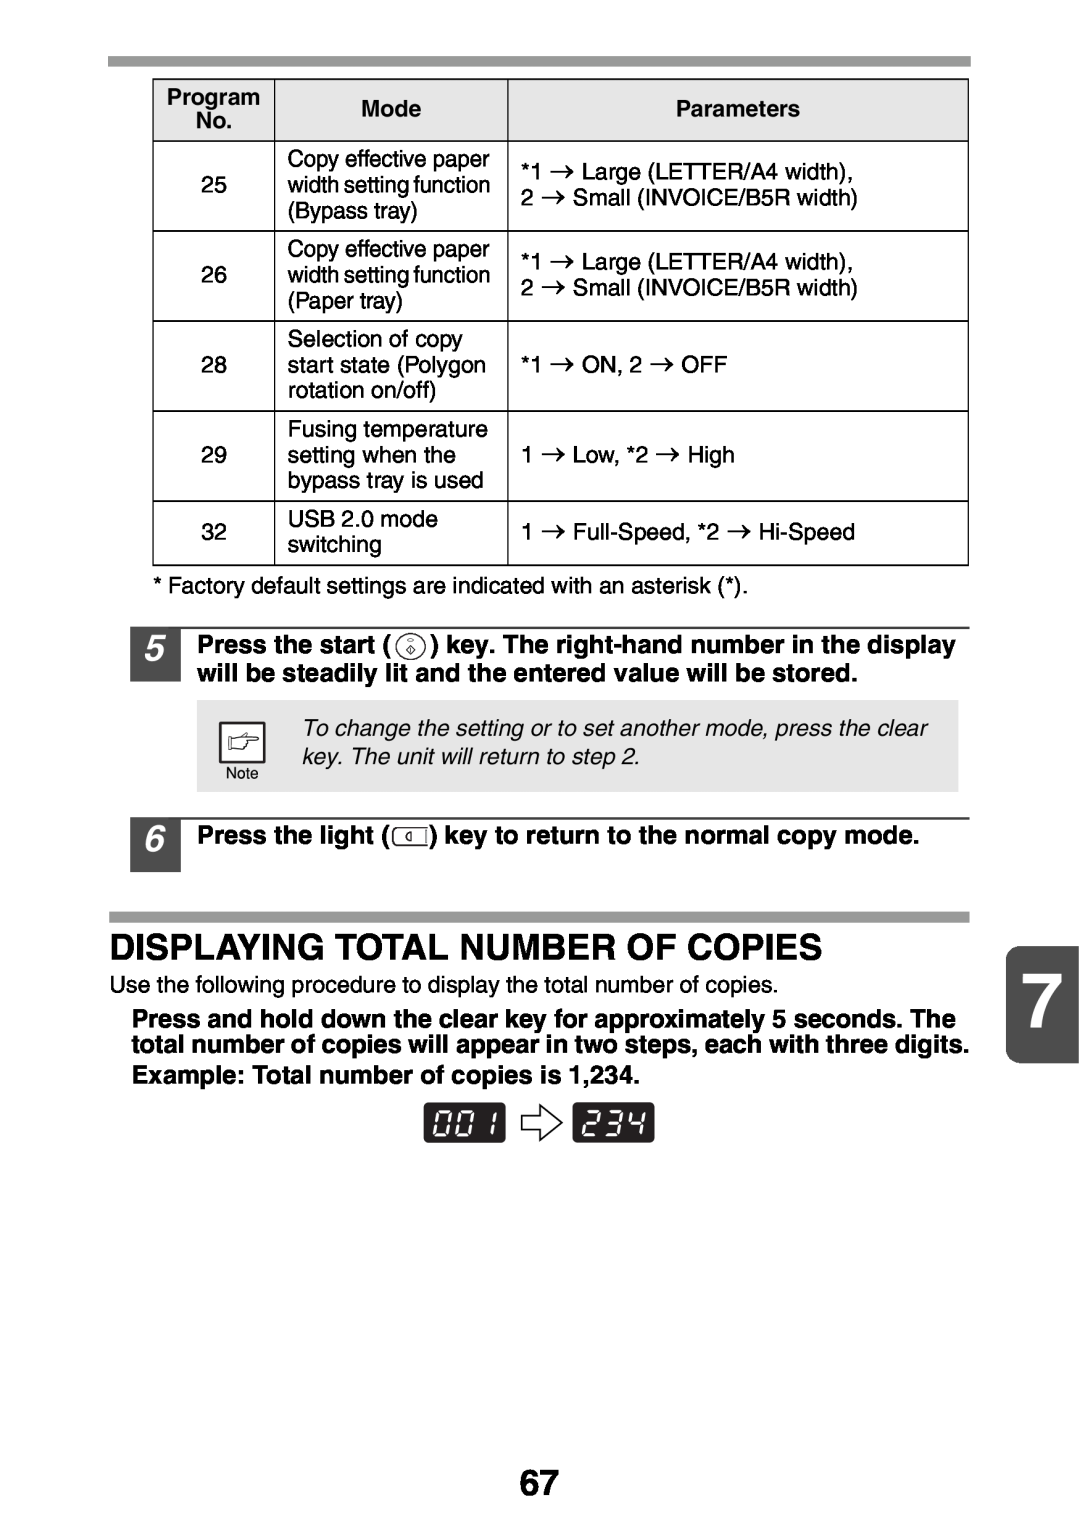 Sharp AL2021, AL2041 manual Displaying Total Number Of Copies, Press the light key to return to the normal copy mode 